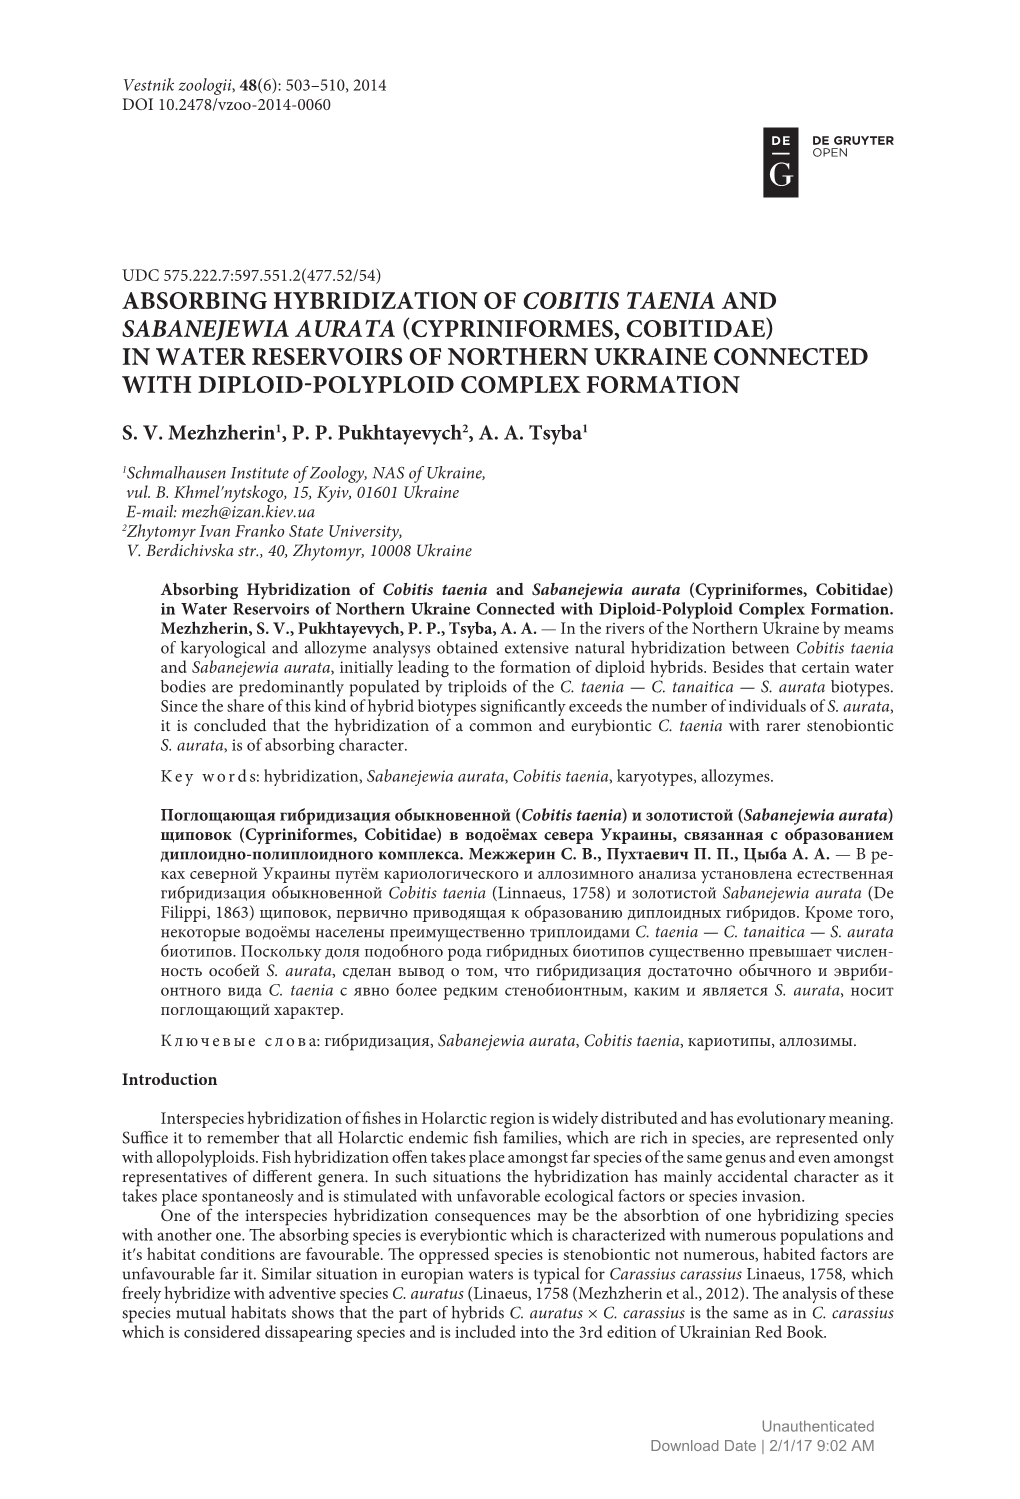 Cypriniformes, Cobitidae) in Water Reservoirs of Northern Ukraine Connected with Diploid-Polyploid Complex Formation